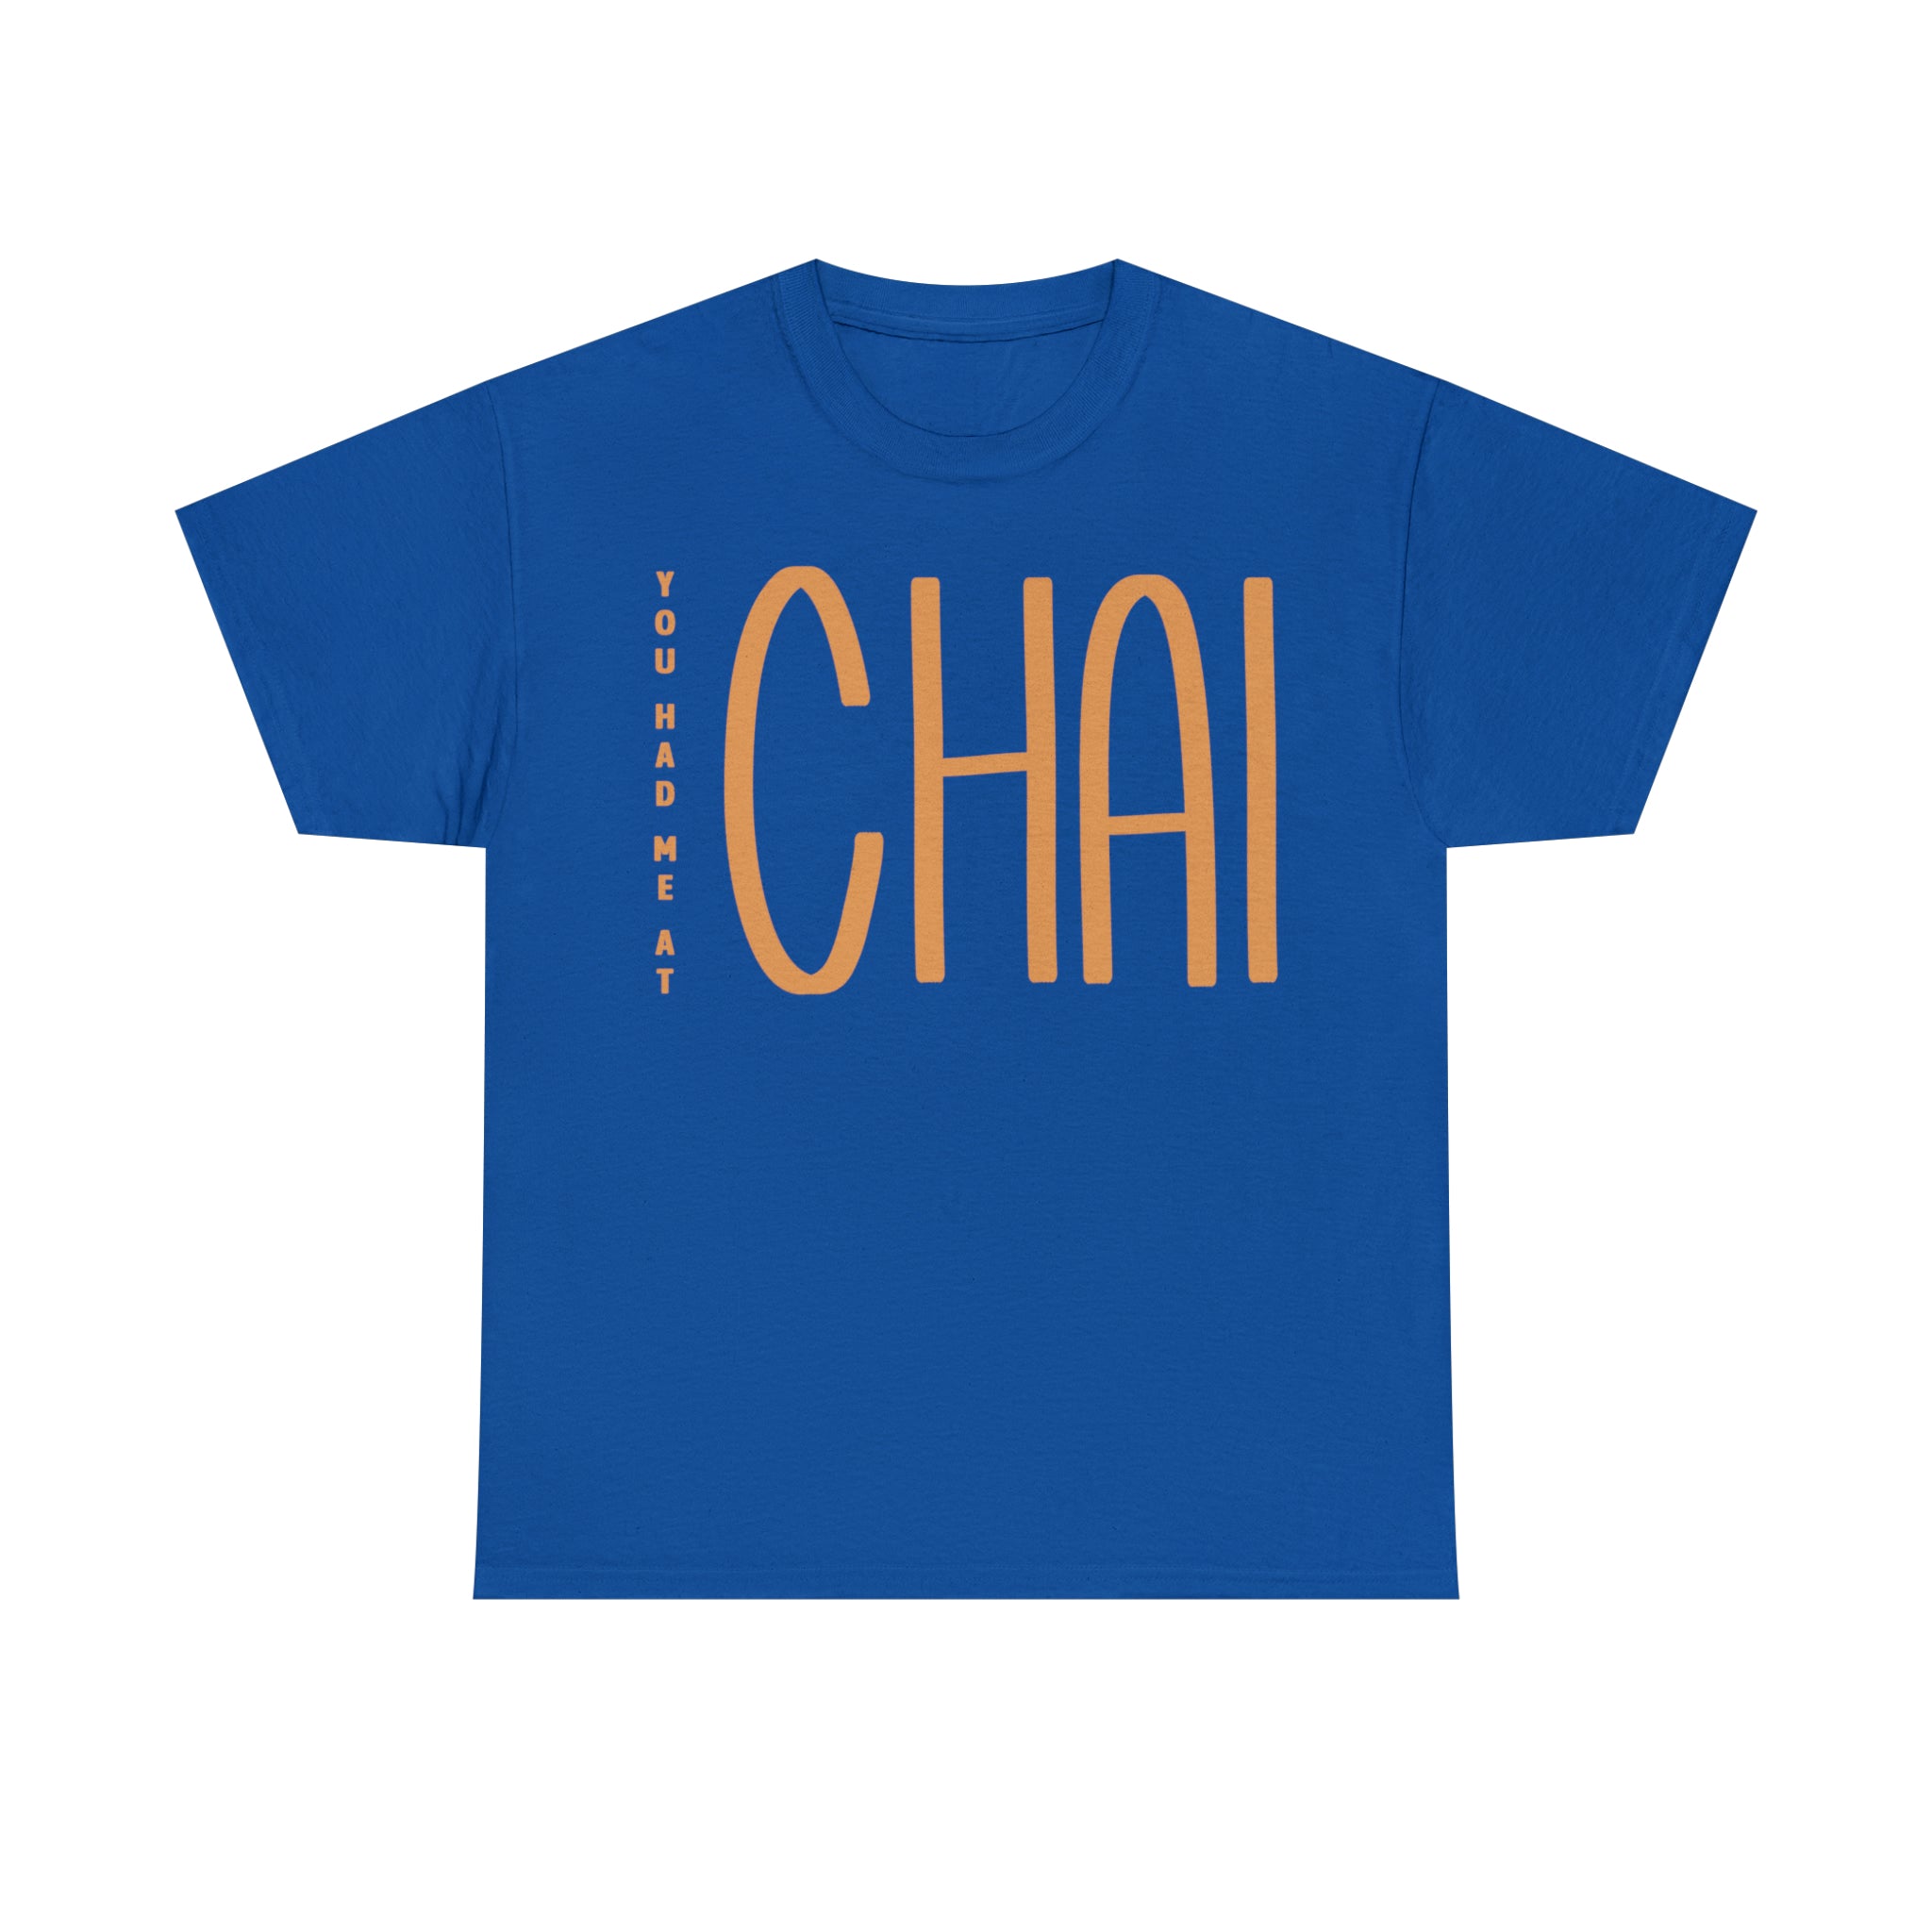 You Had Me At Chai T-Shirt Designs by C&C